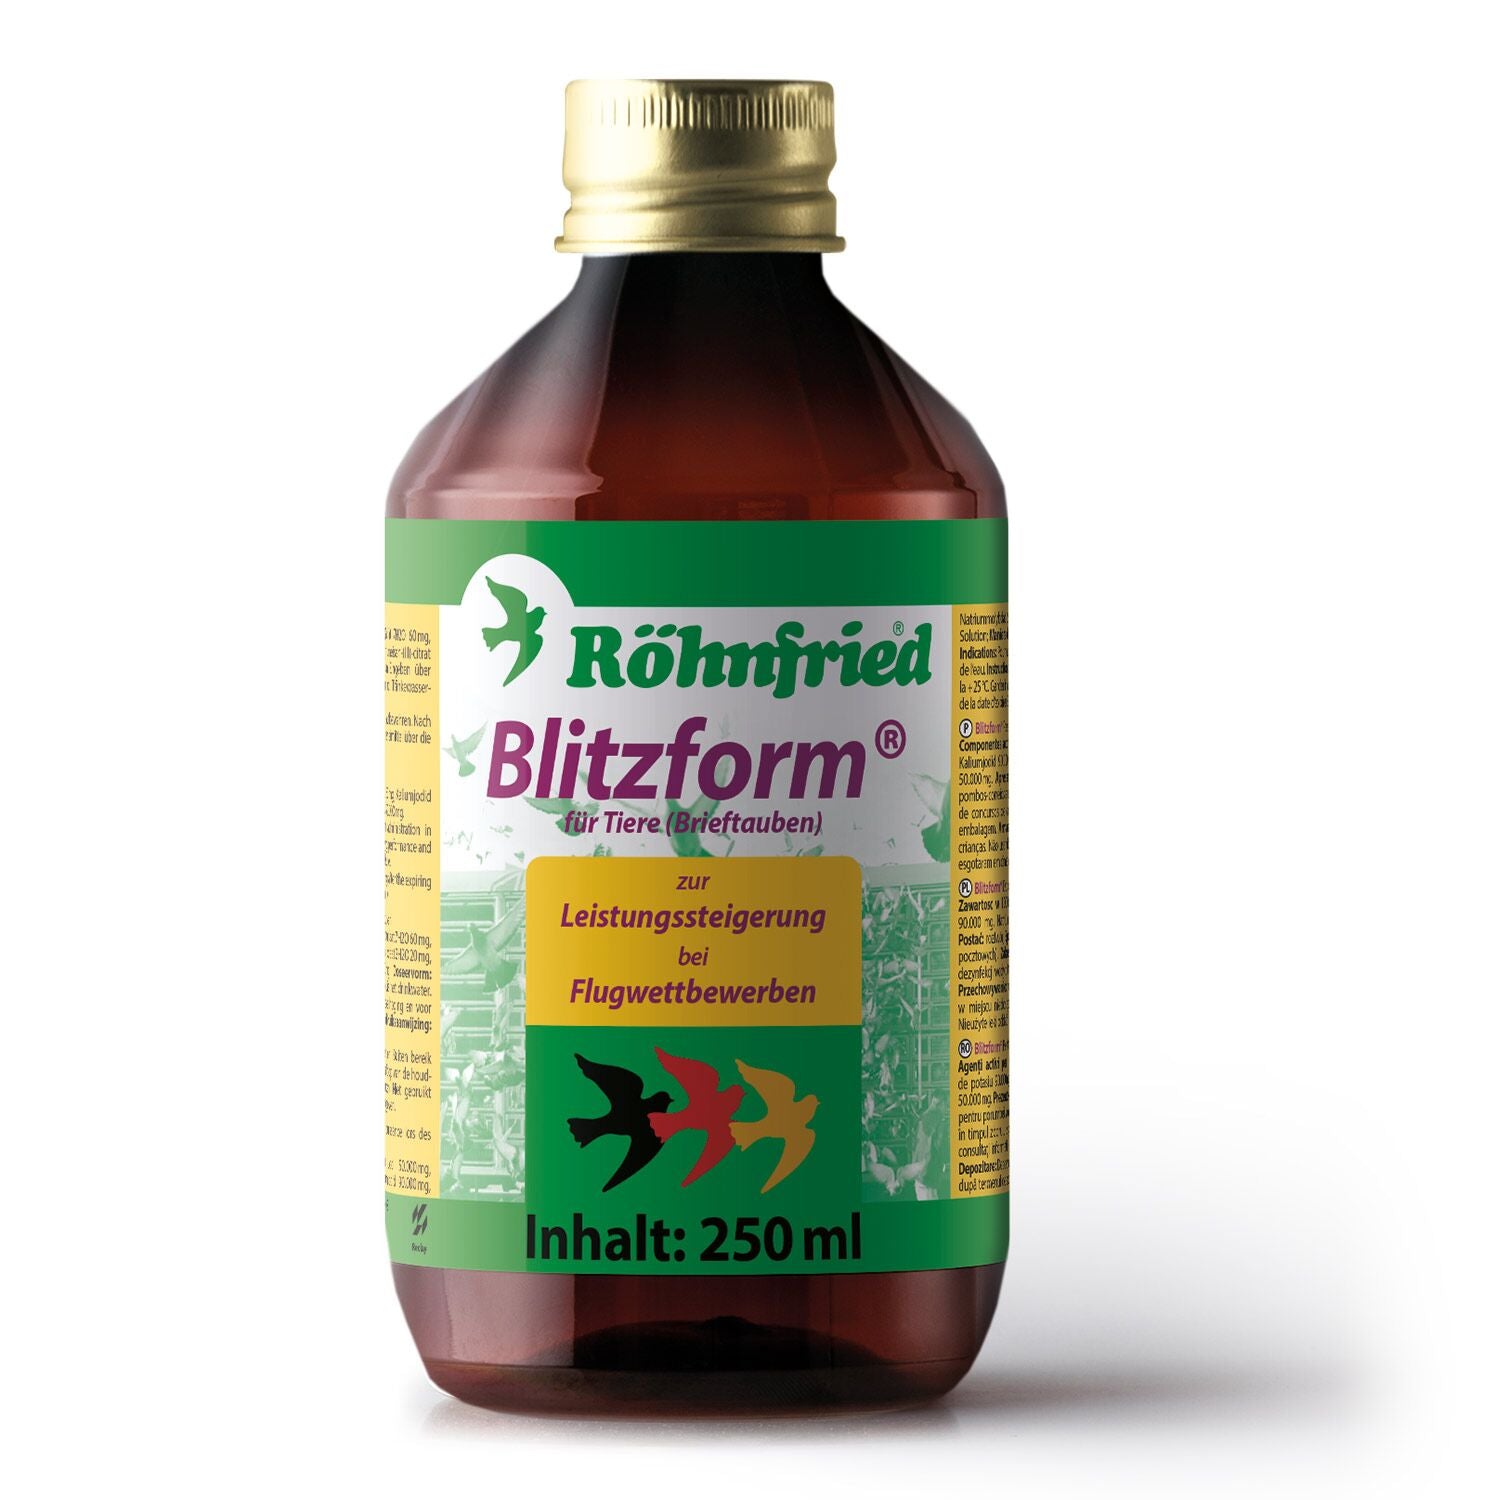 Blitzform for Extra-Power (100ml)